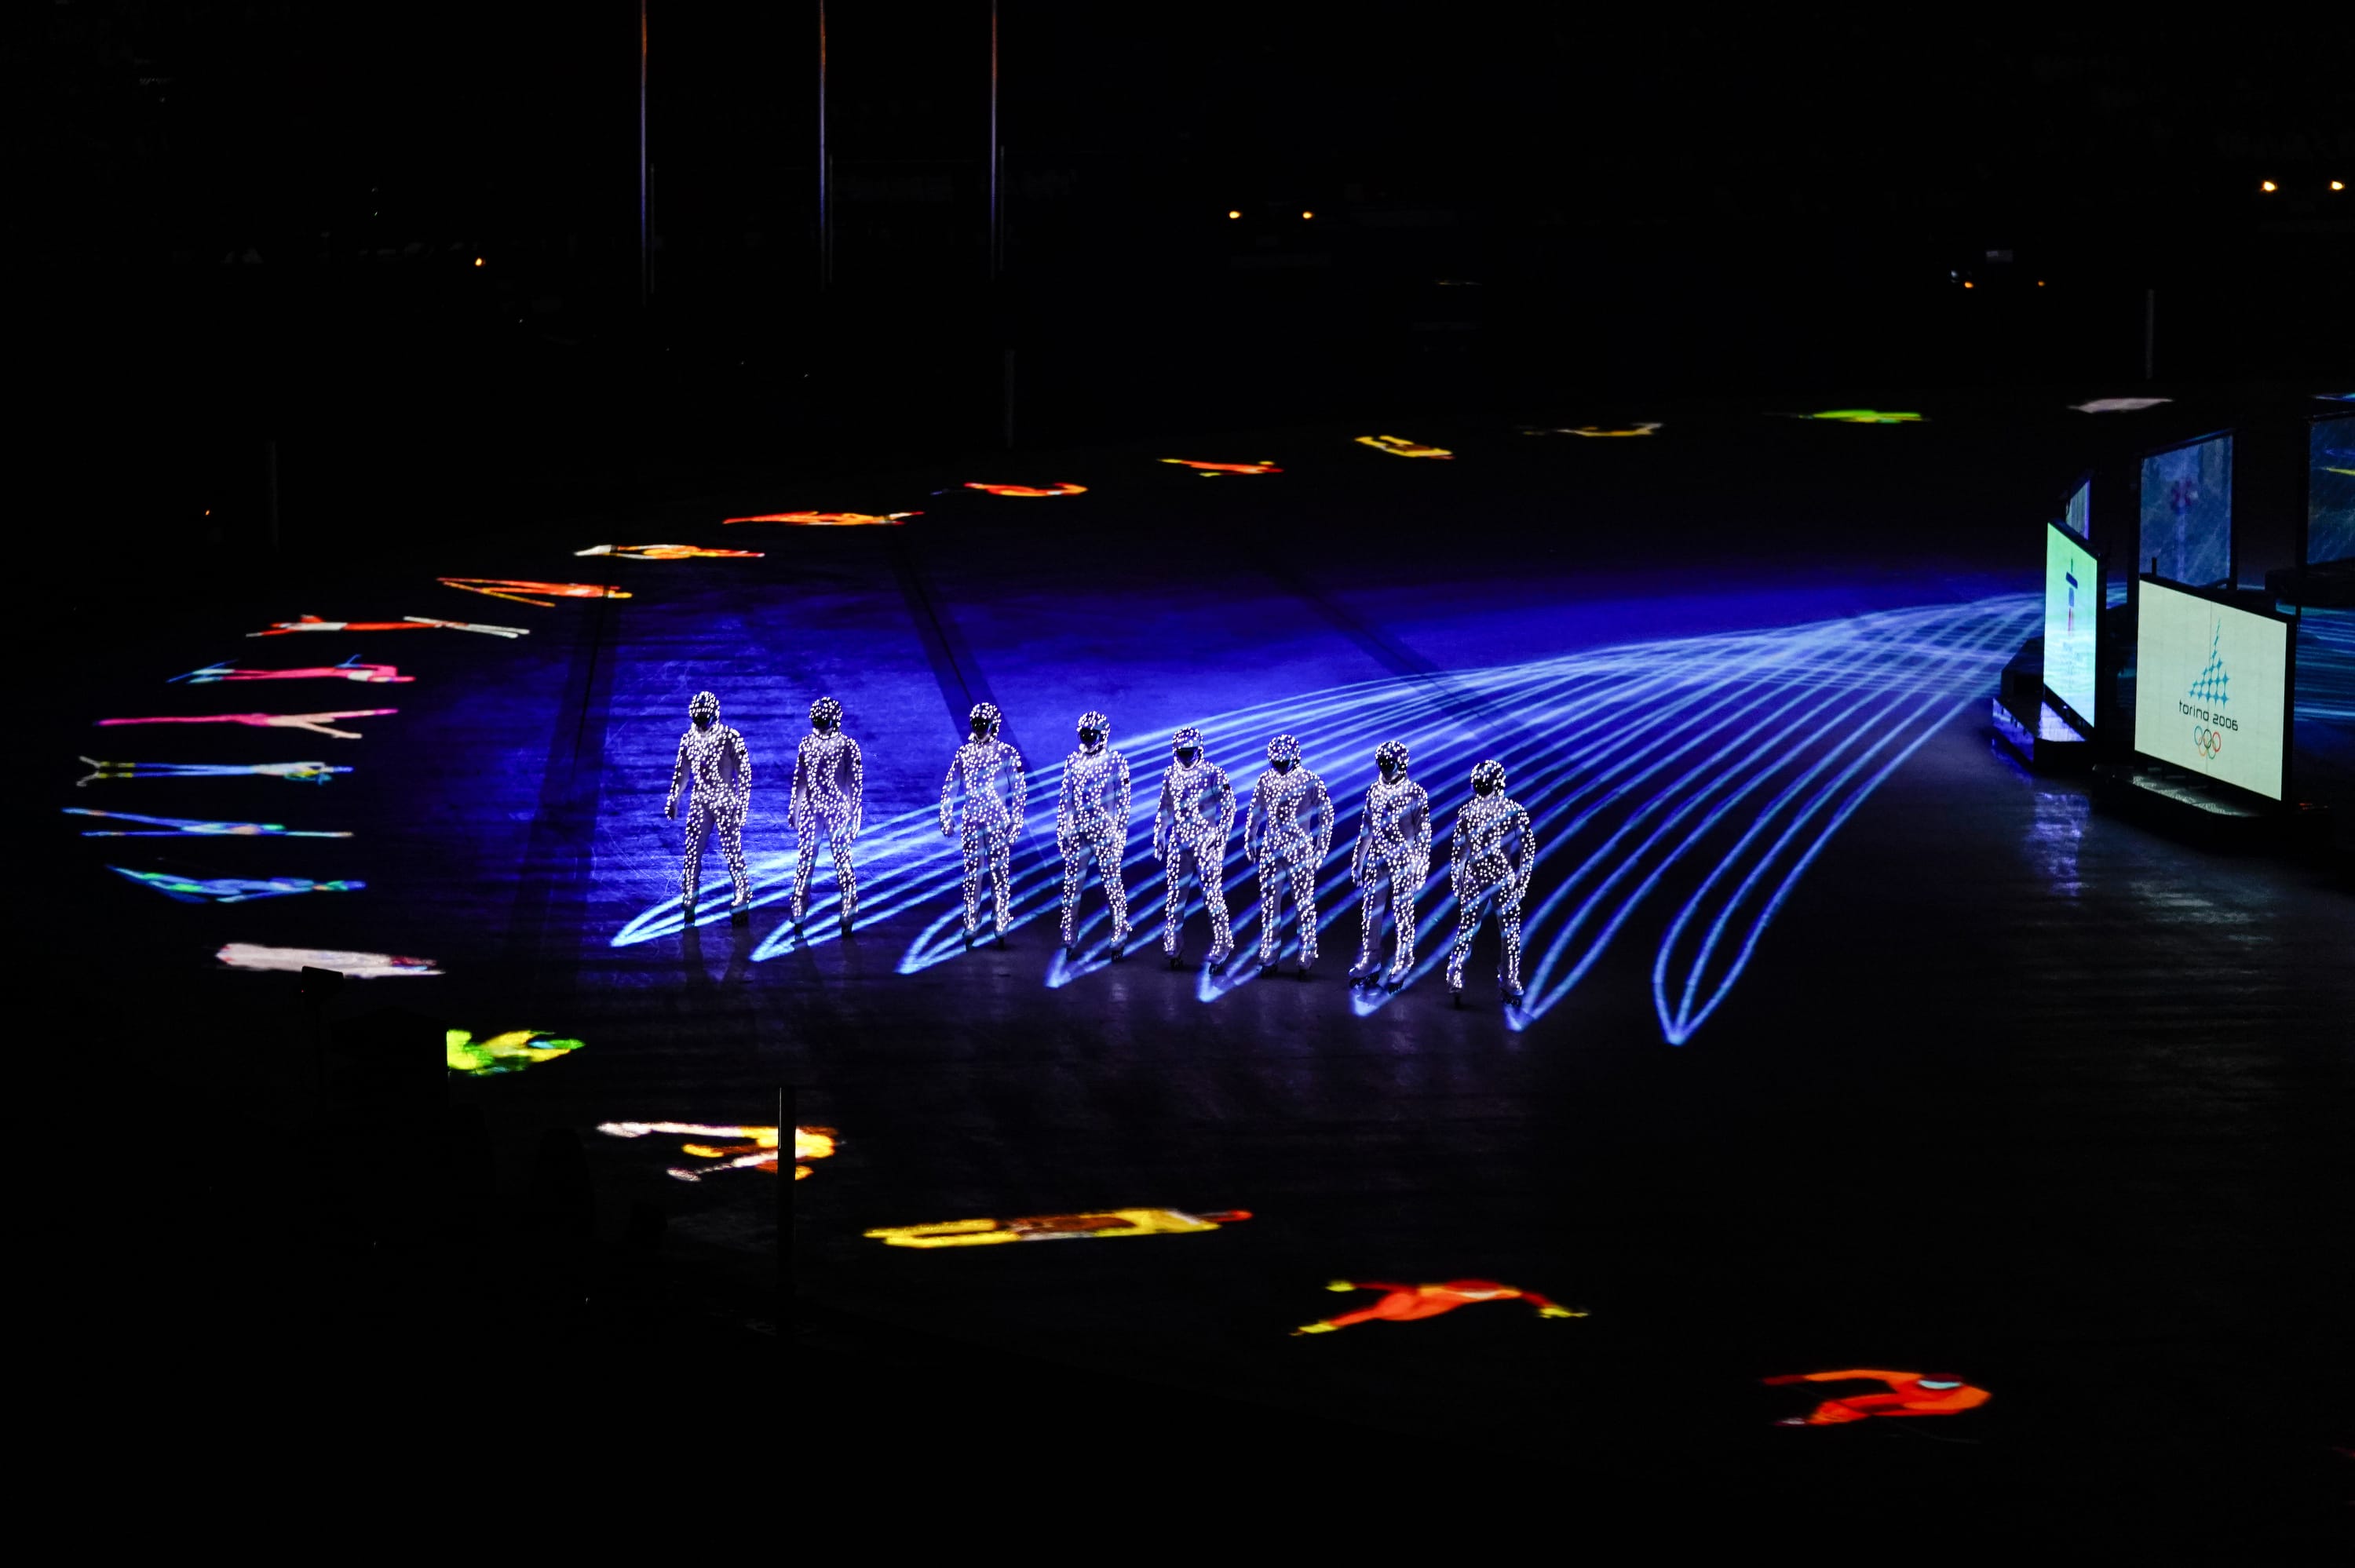 Winter Olympics closing ceremony got really weird, and it was awesome